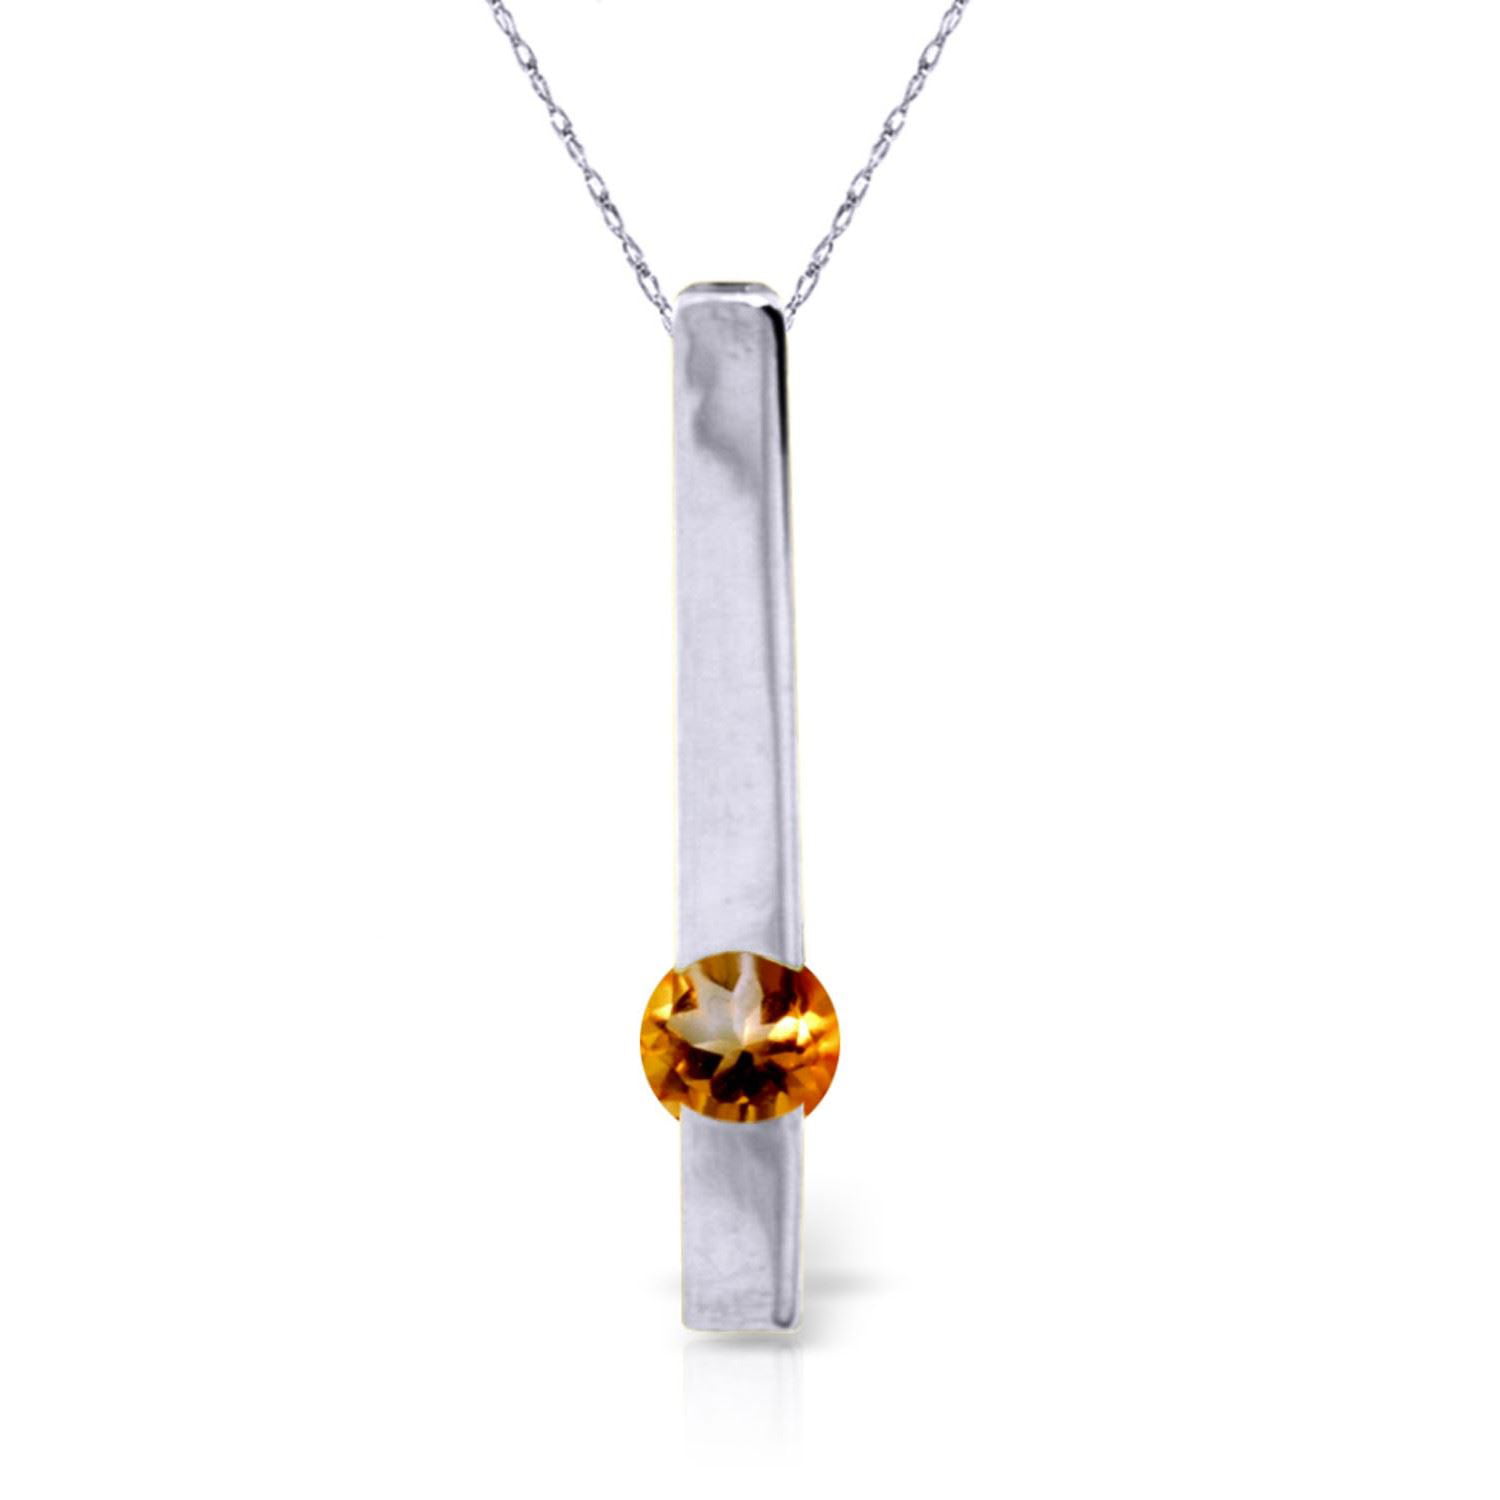 ALARRI 0.25 CTW 14K Solid White Gold Necklace Naturalcitrine with 18 Inch Chain Length